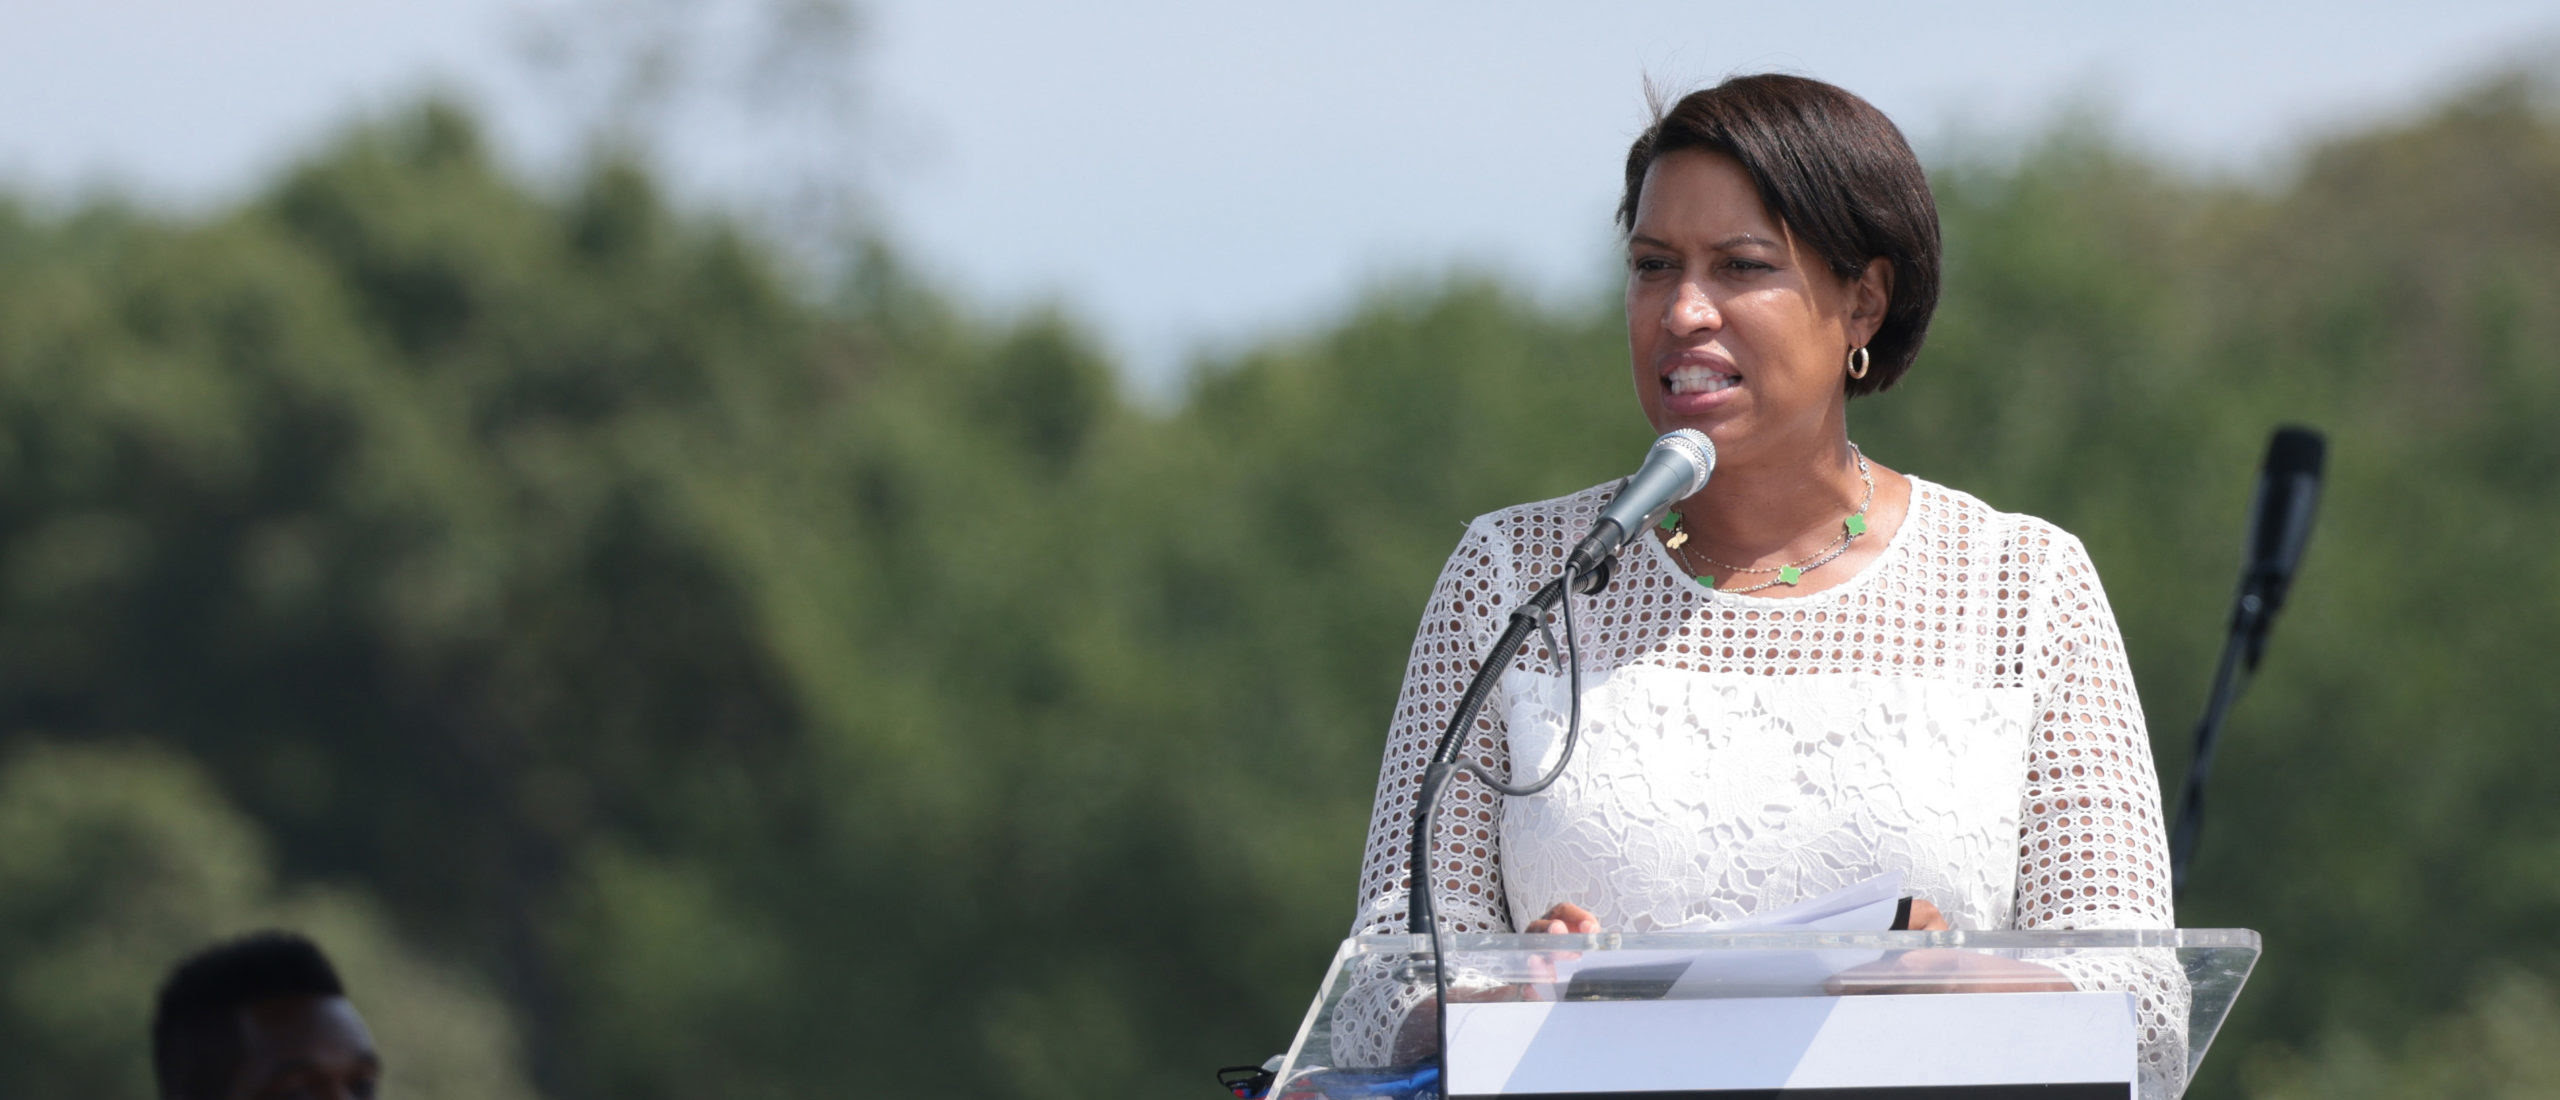 DC Mayor Criticized For Announcing Expectation That Schools Will Transition To Virtual Learning